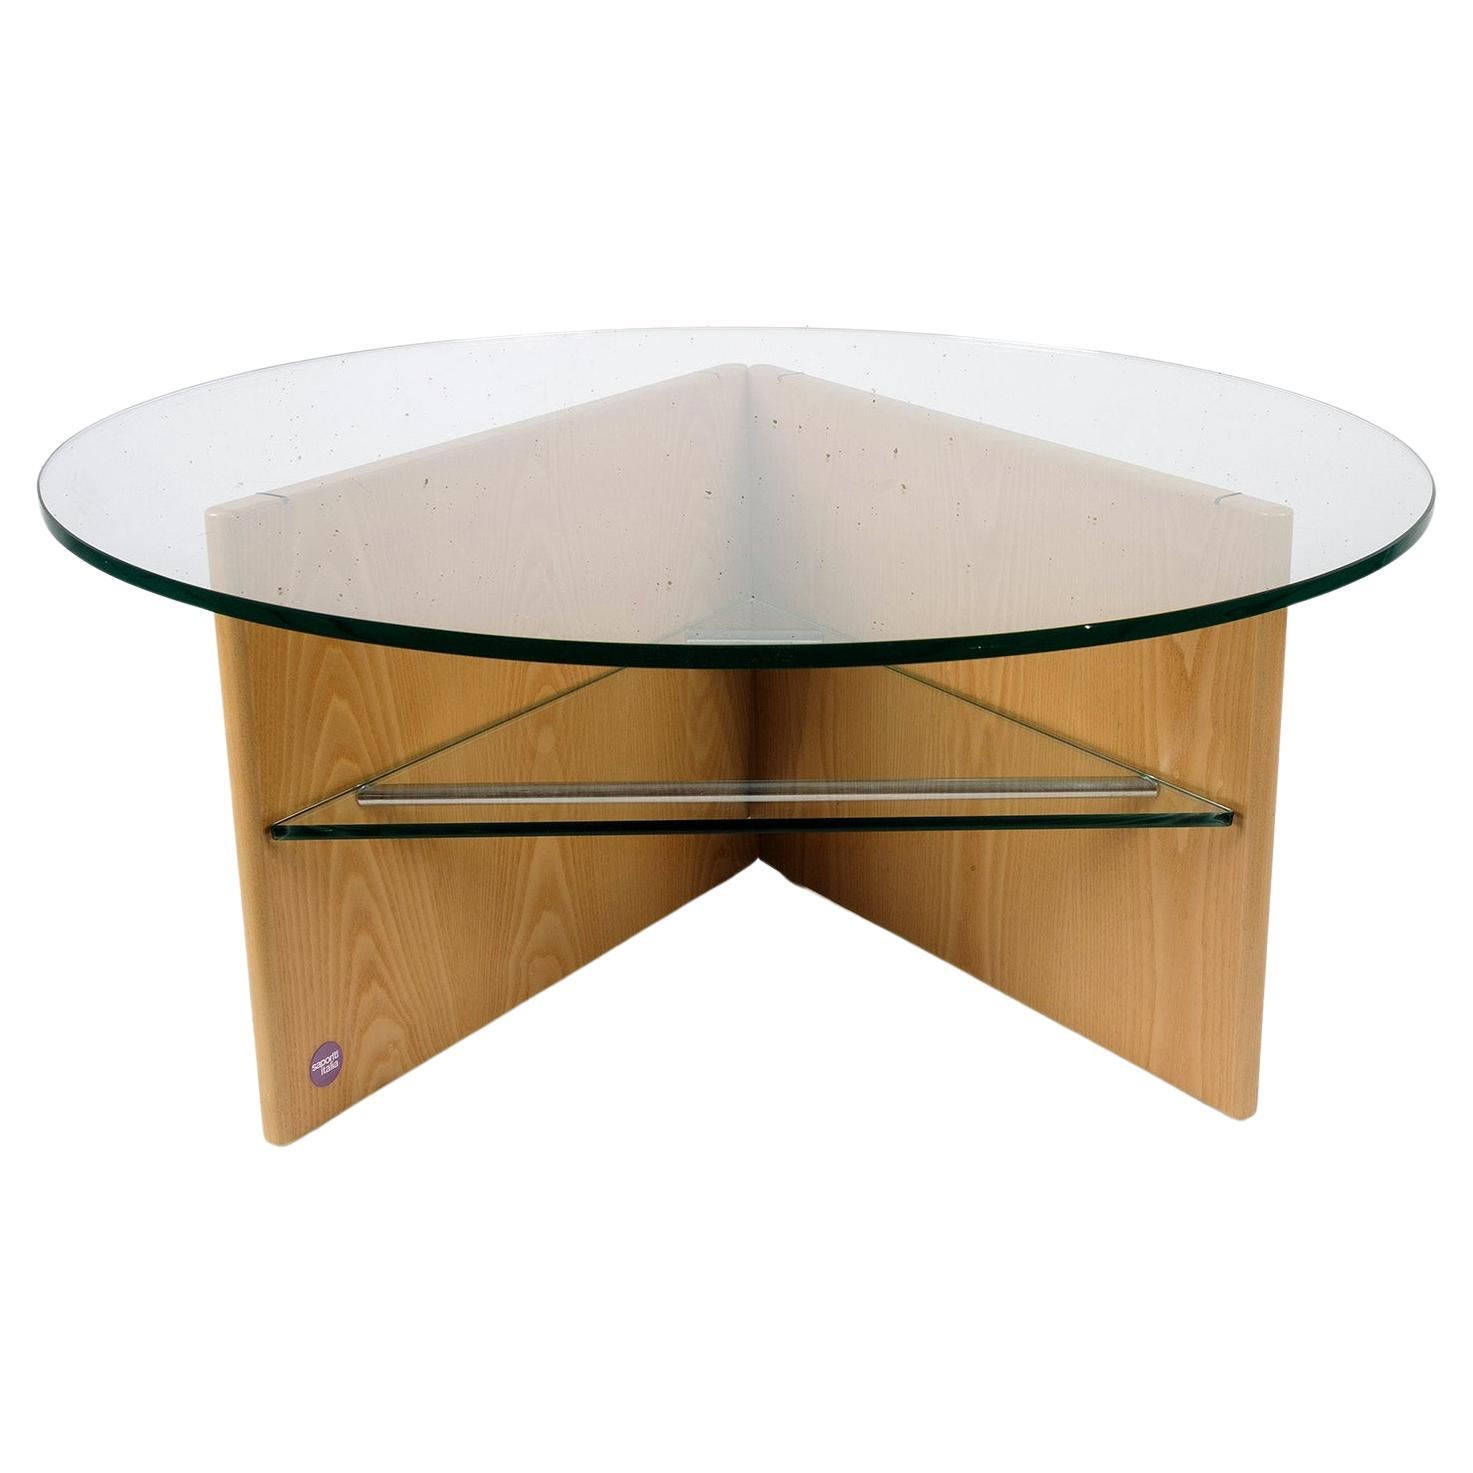 Beautiful two tier coffee or side table by Giovanni Offredi for Saporiti Italia, 1970's.